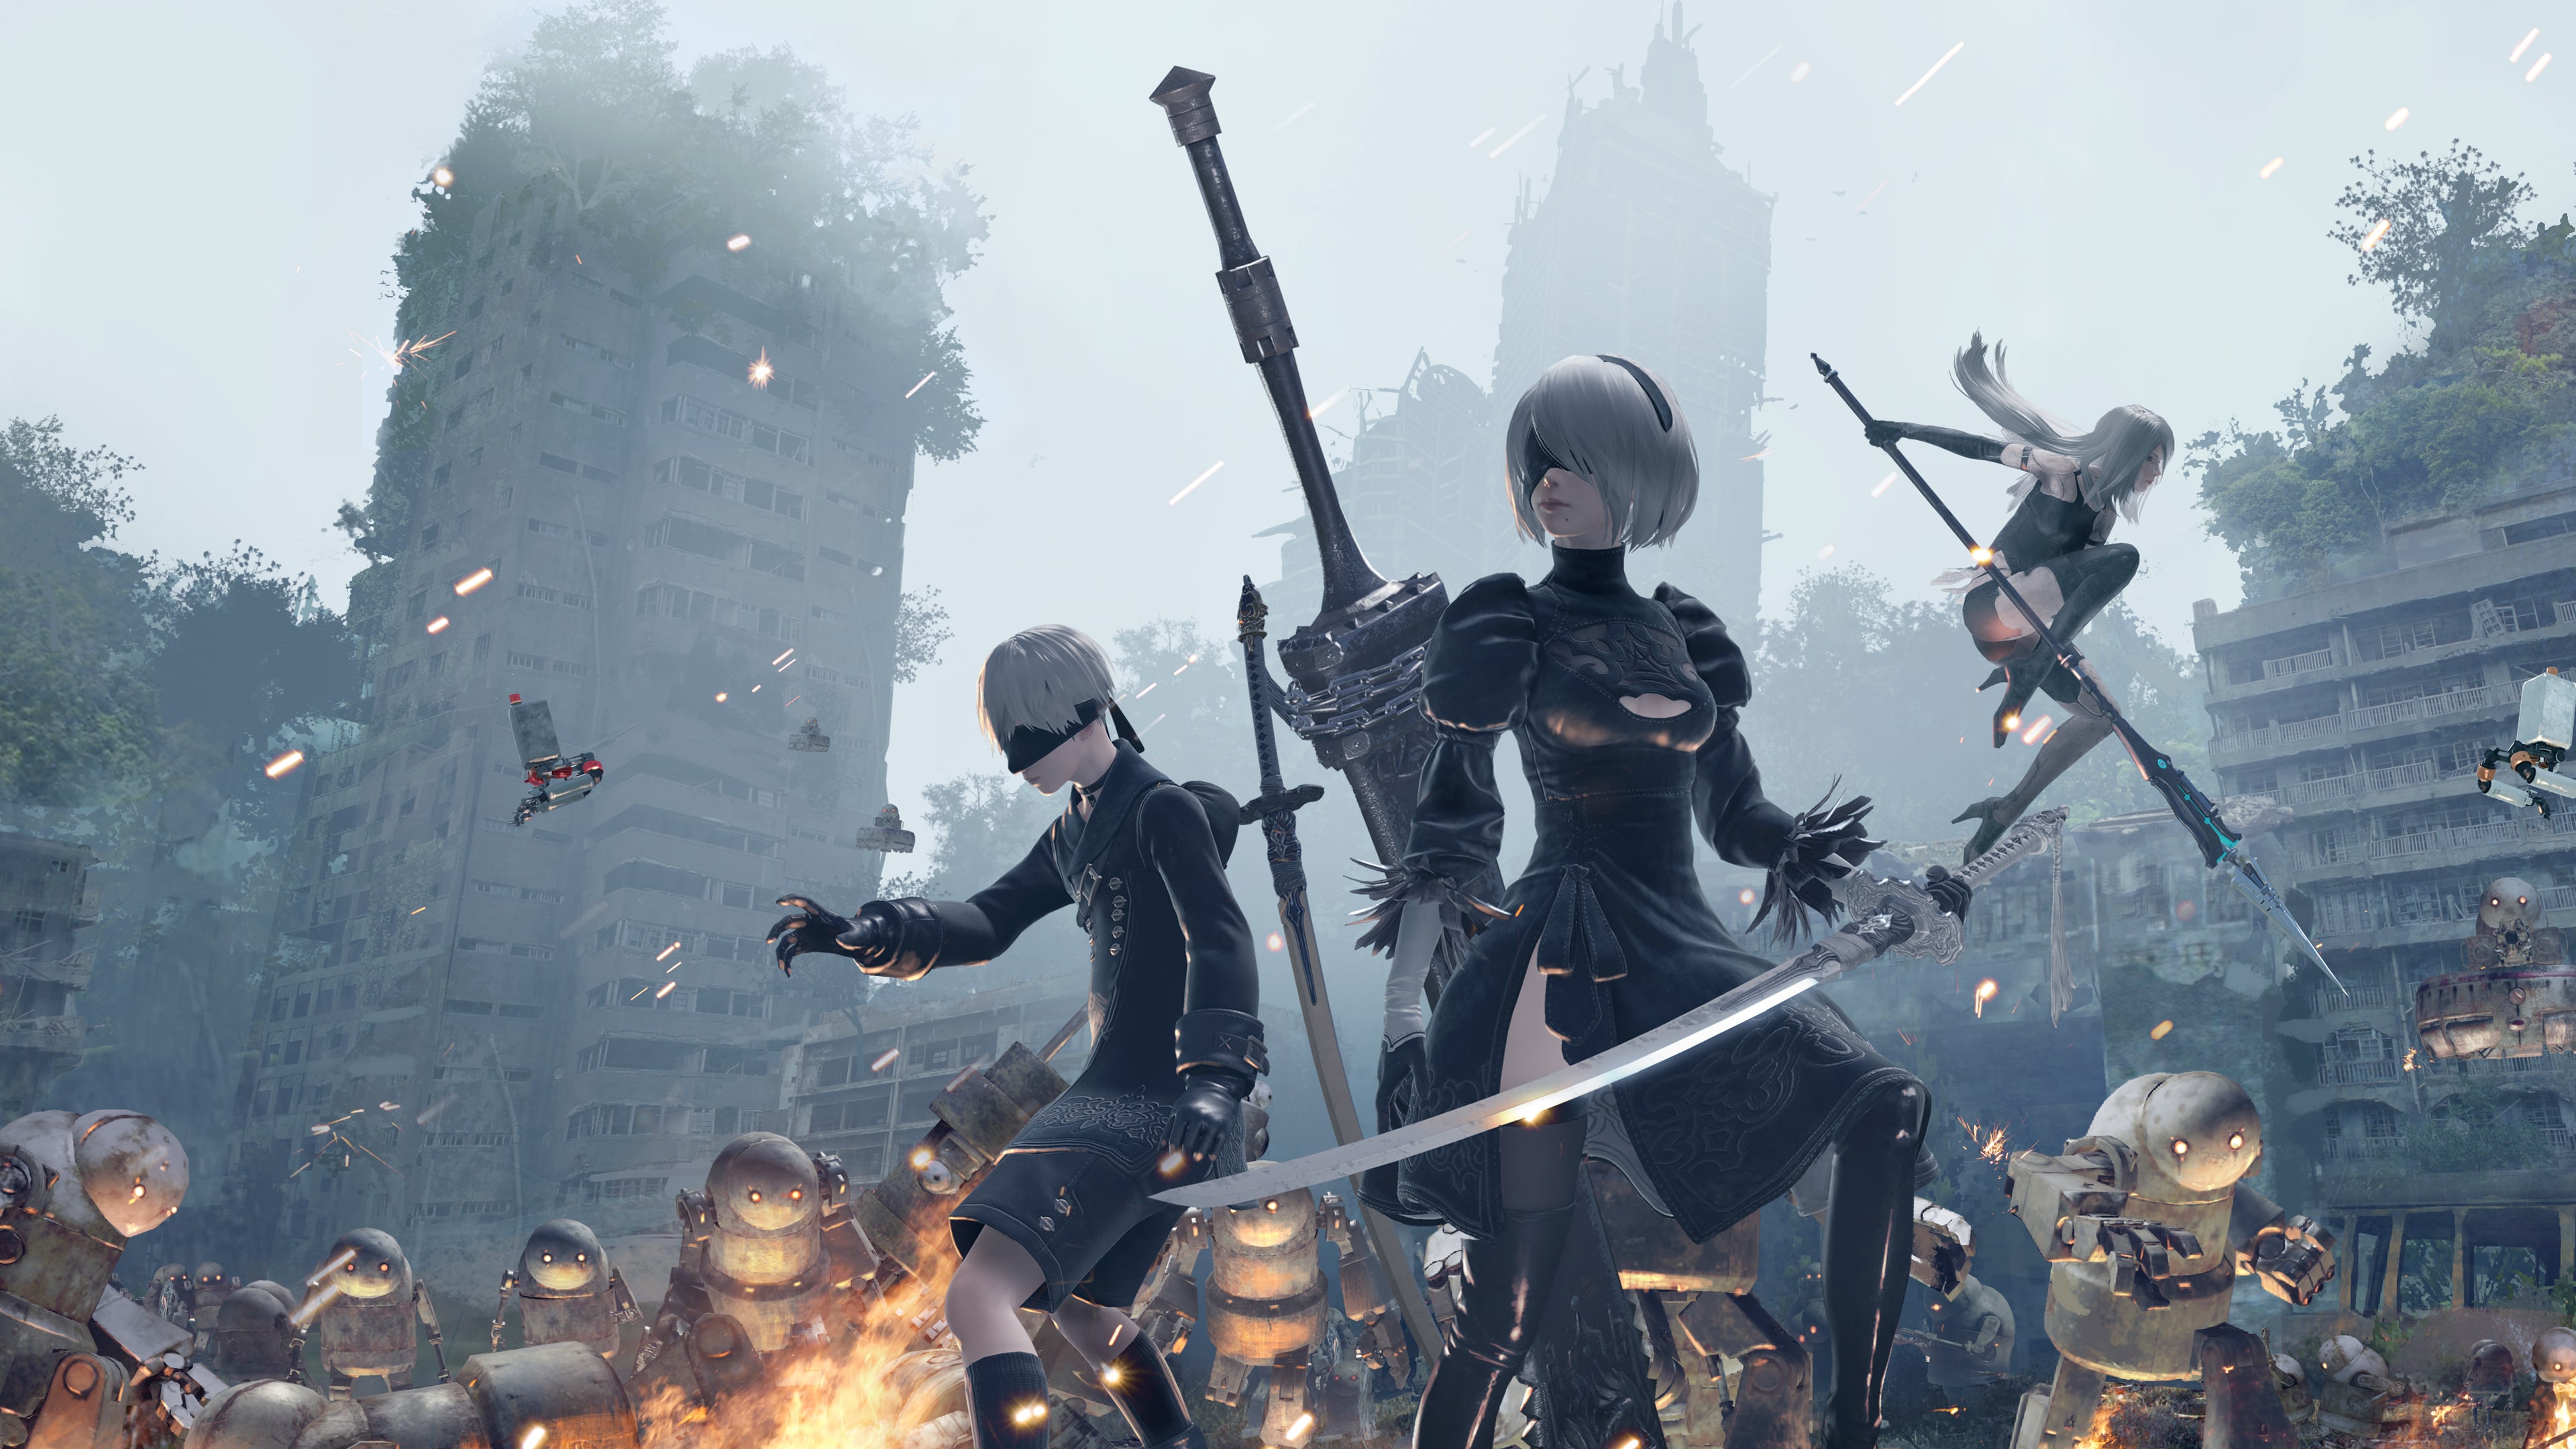 NieR:Automata Game of the YoRHa Edition (中日英韓文版)